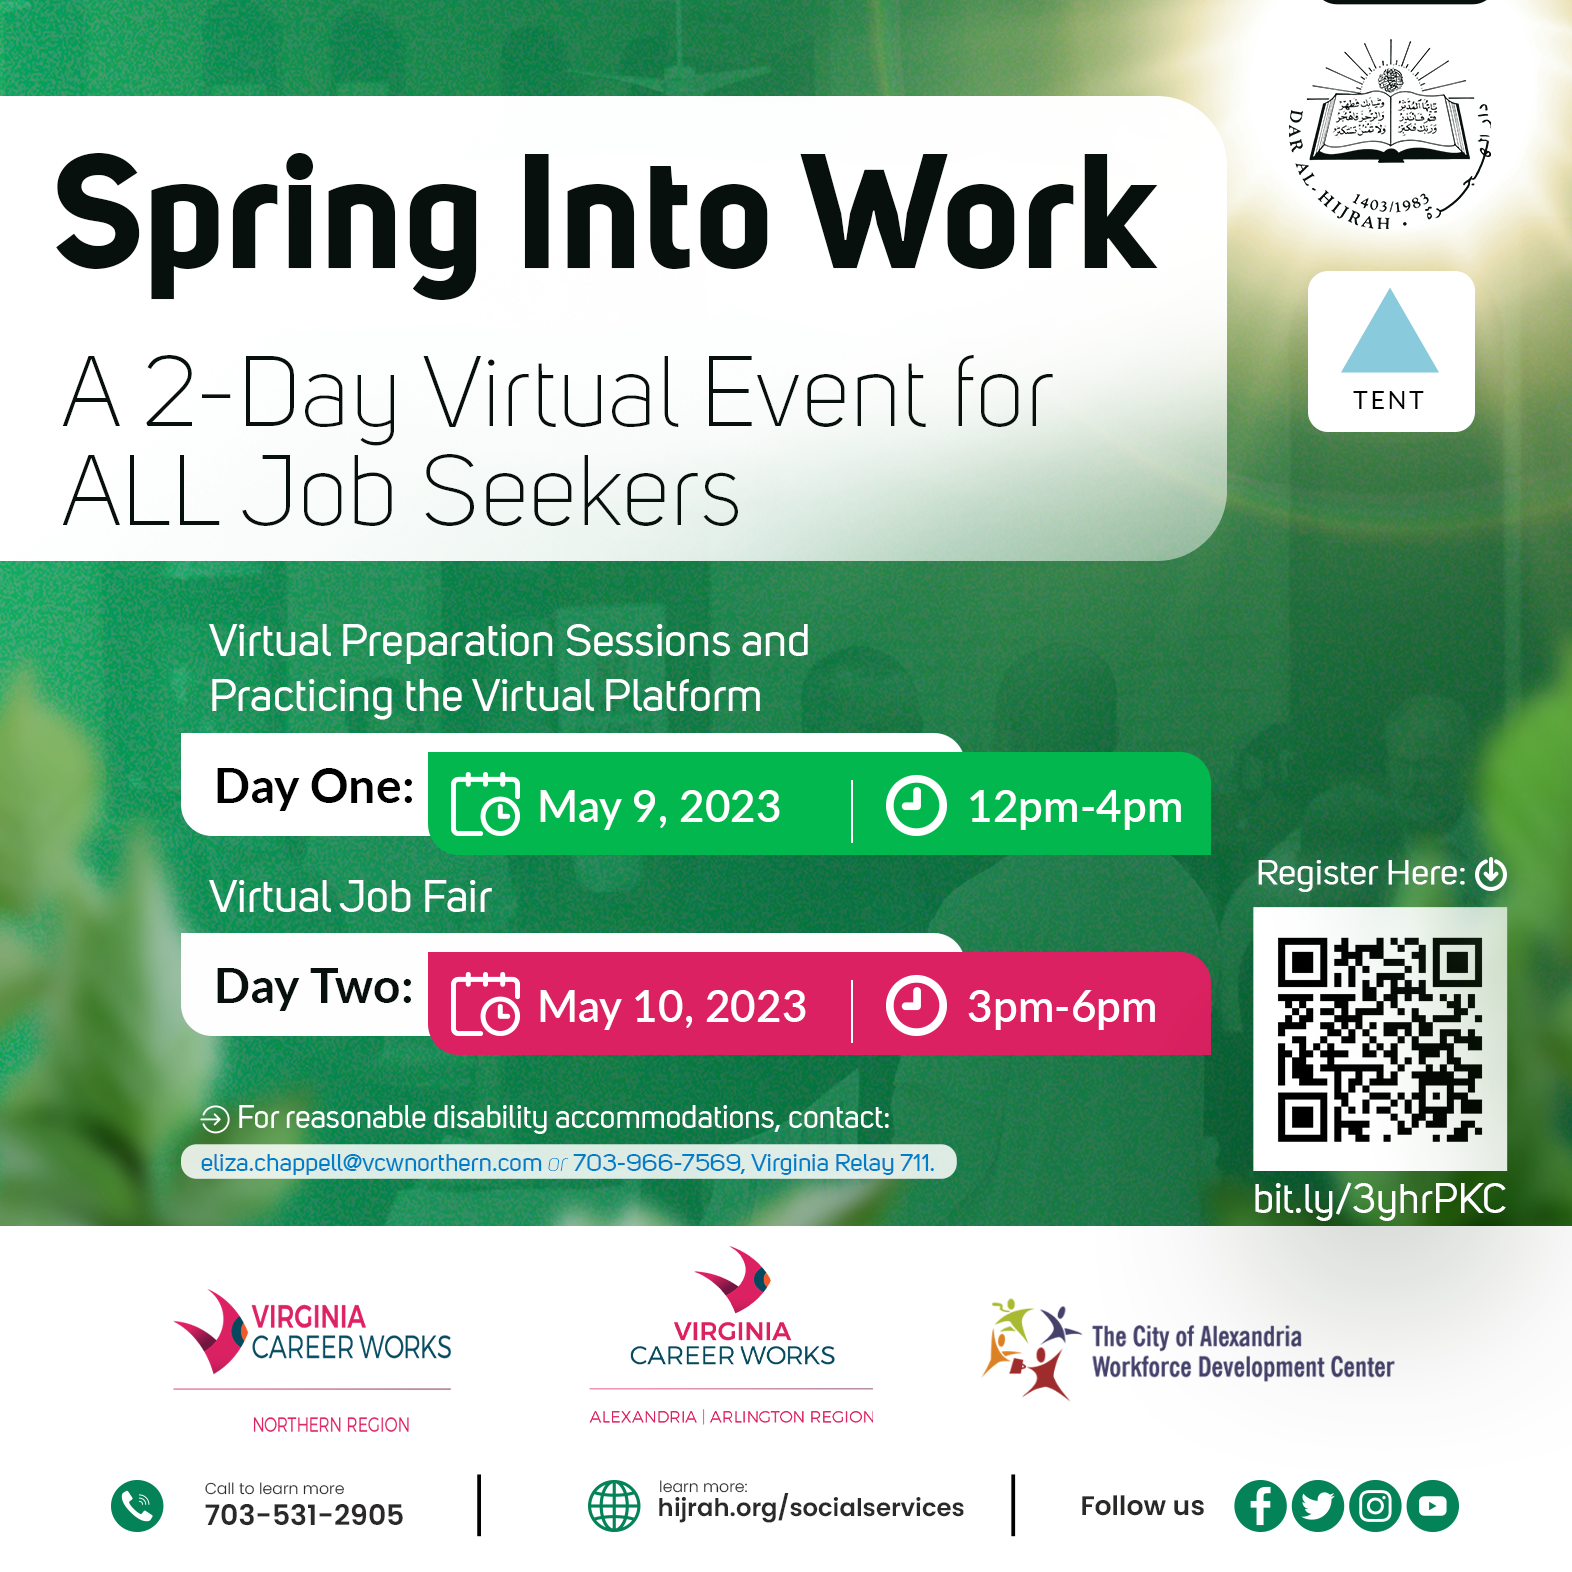 Spring Into Work flyer, starts May 9th to May 10th